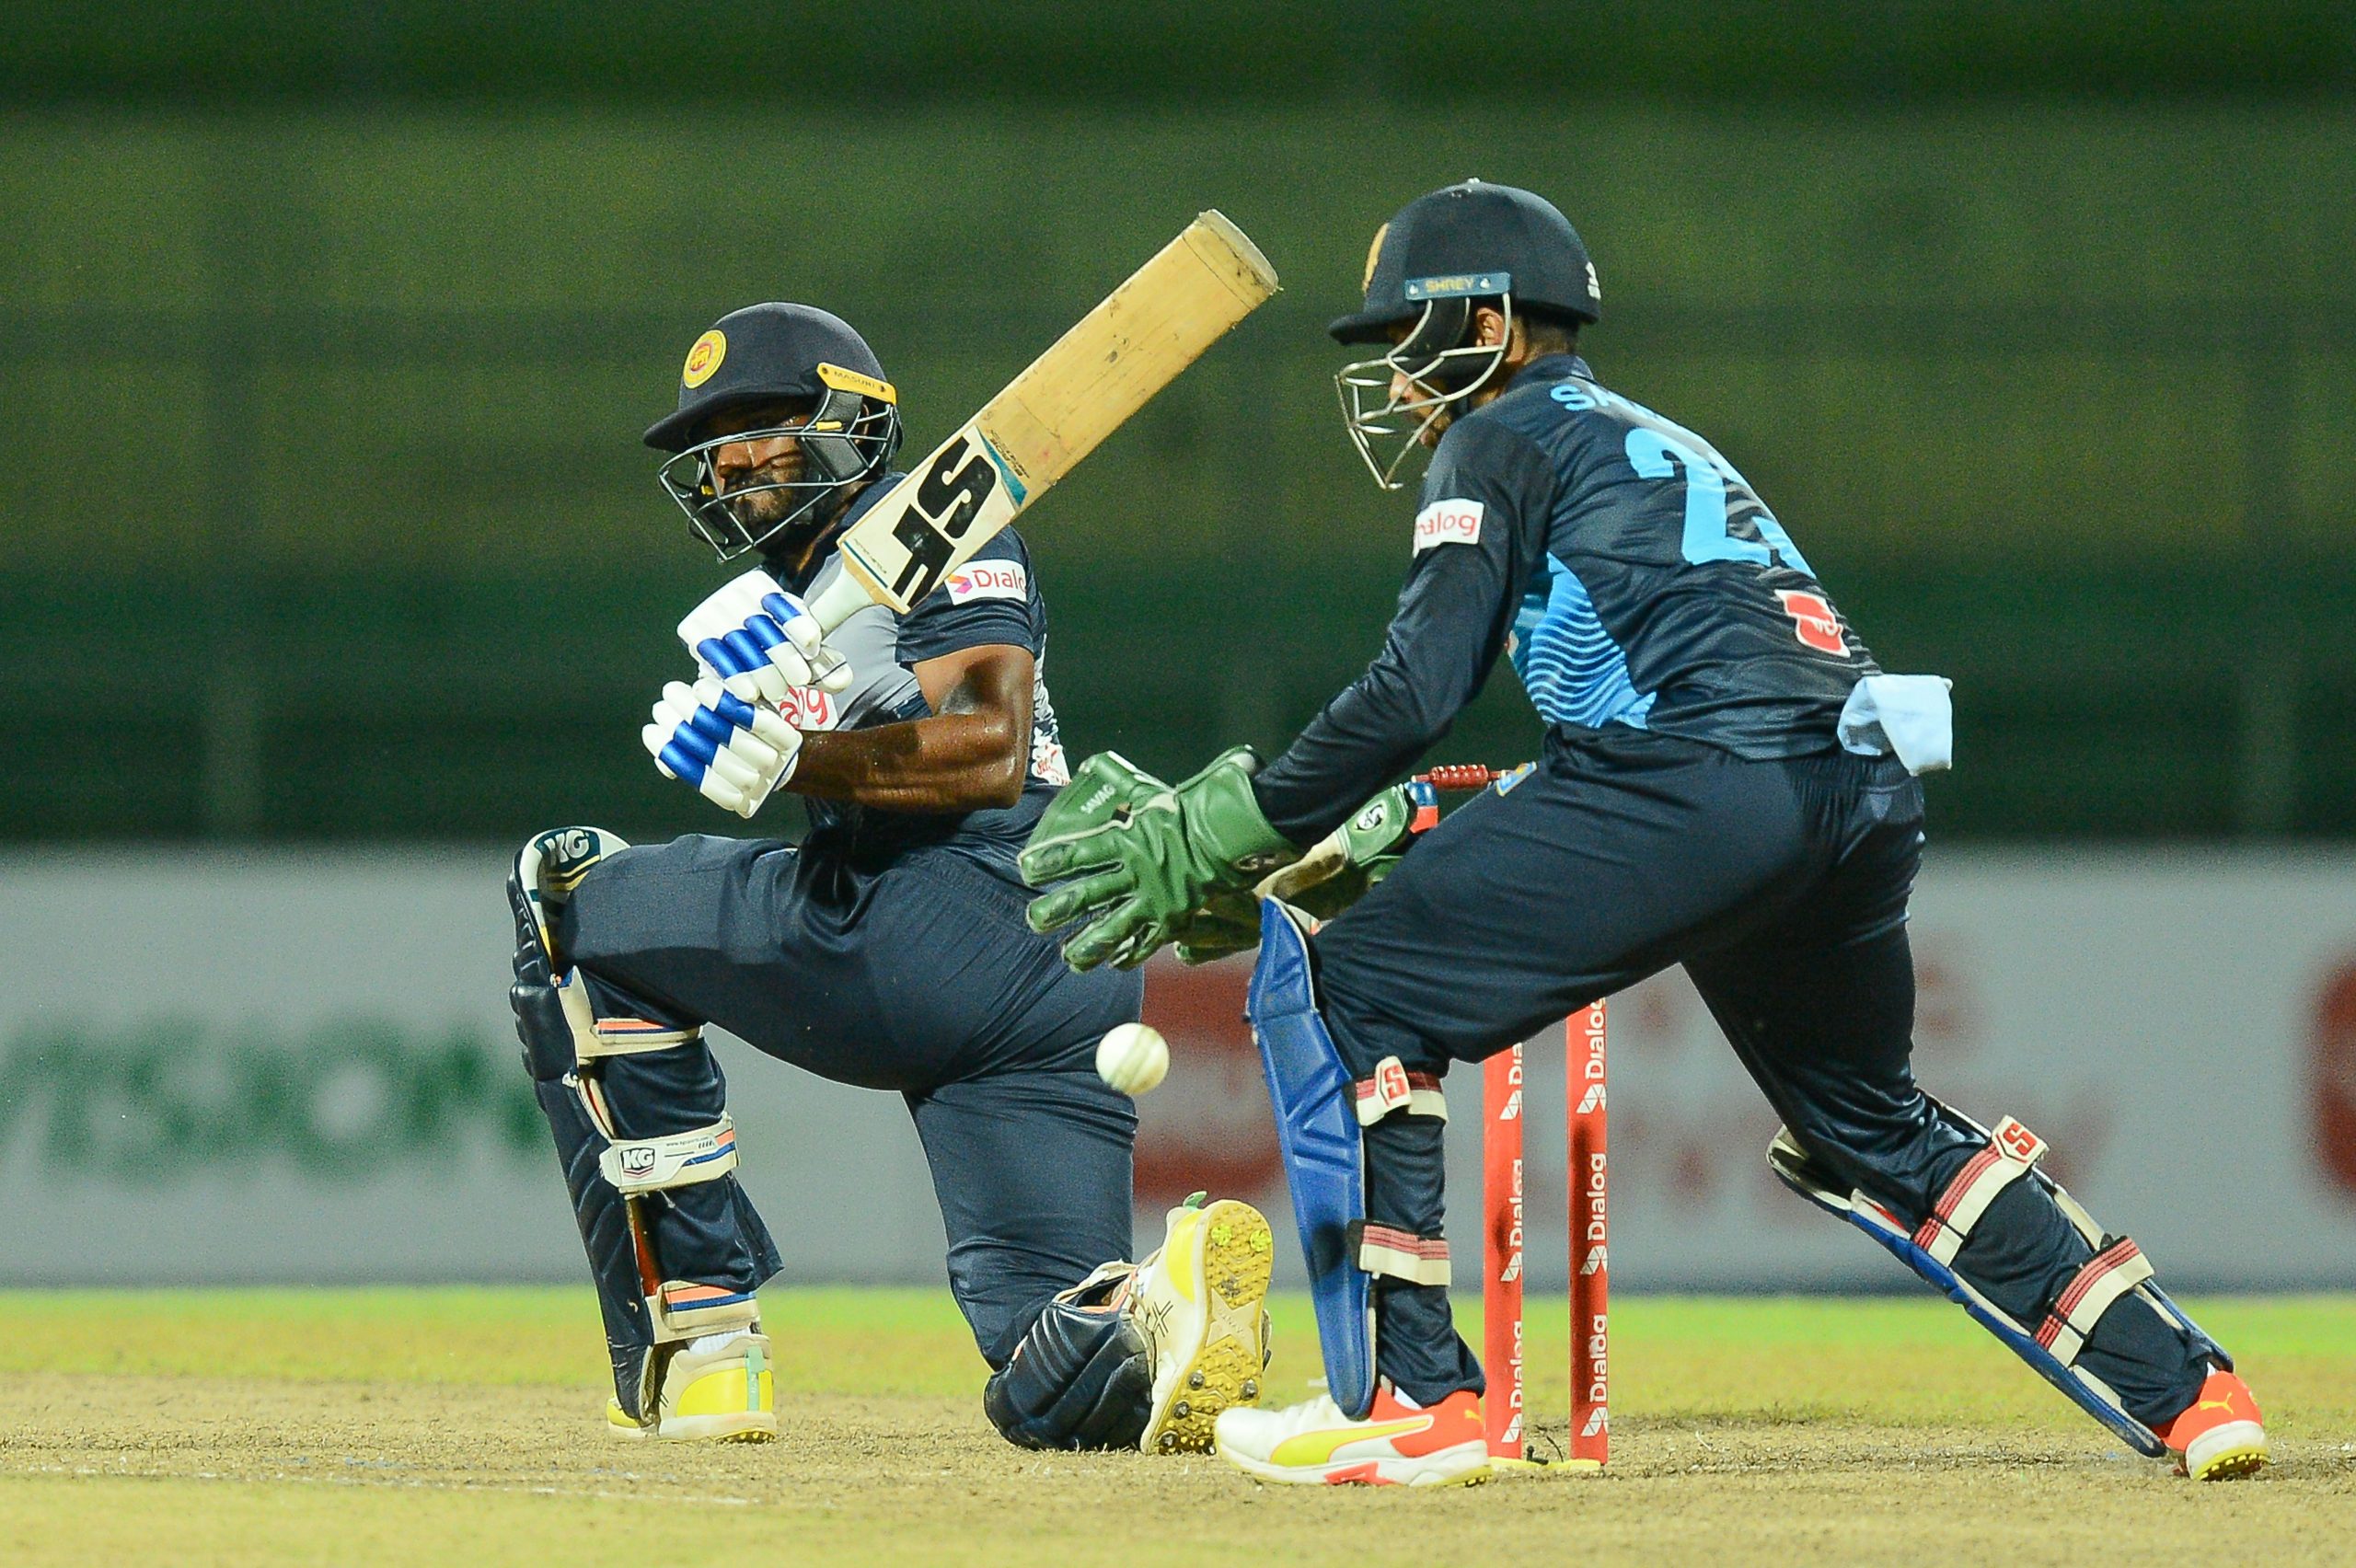 Lahiru Madushanka packs the promise of a potential all-rounder